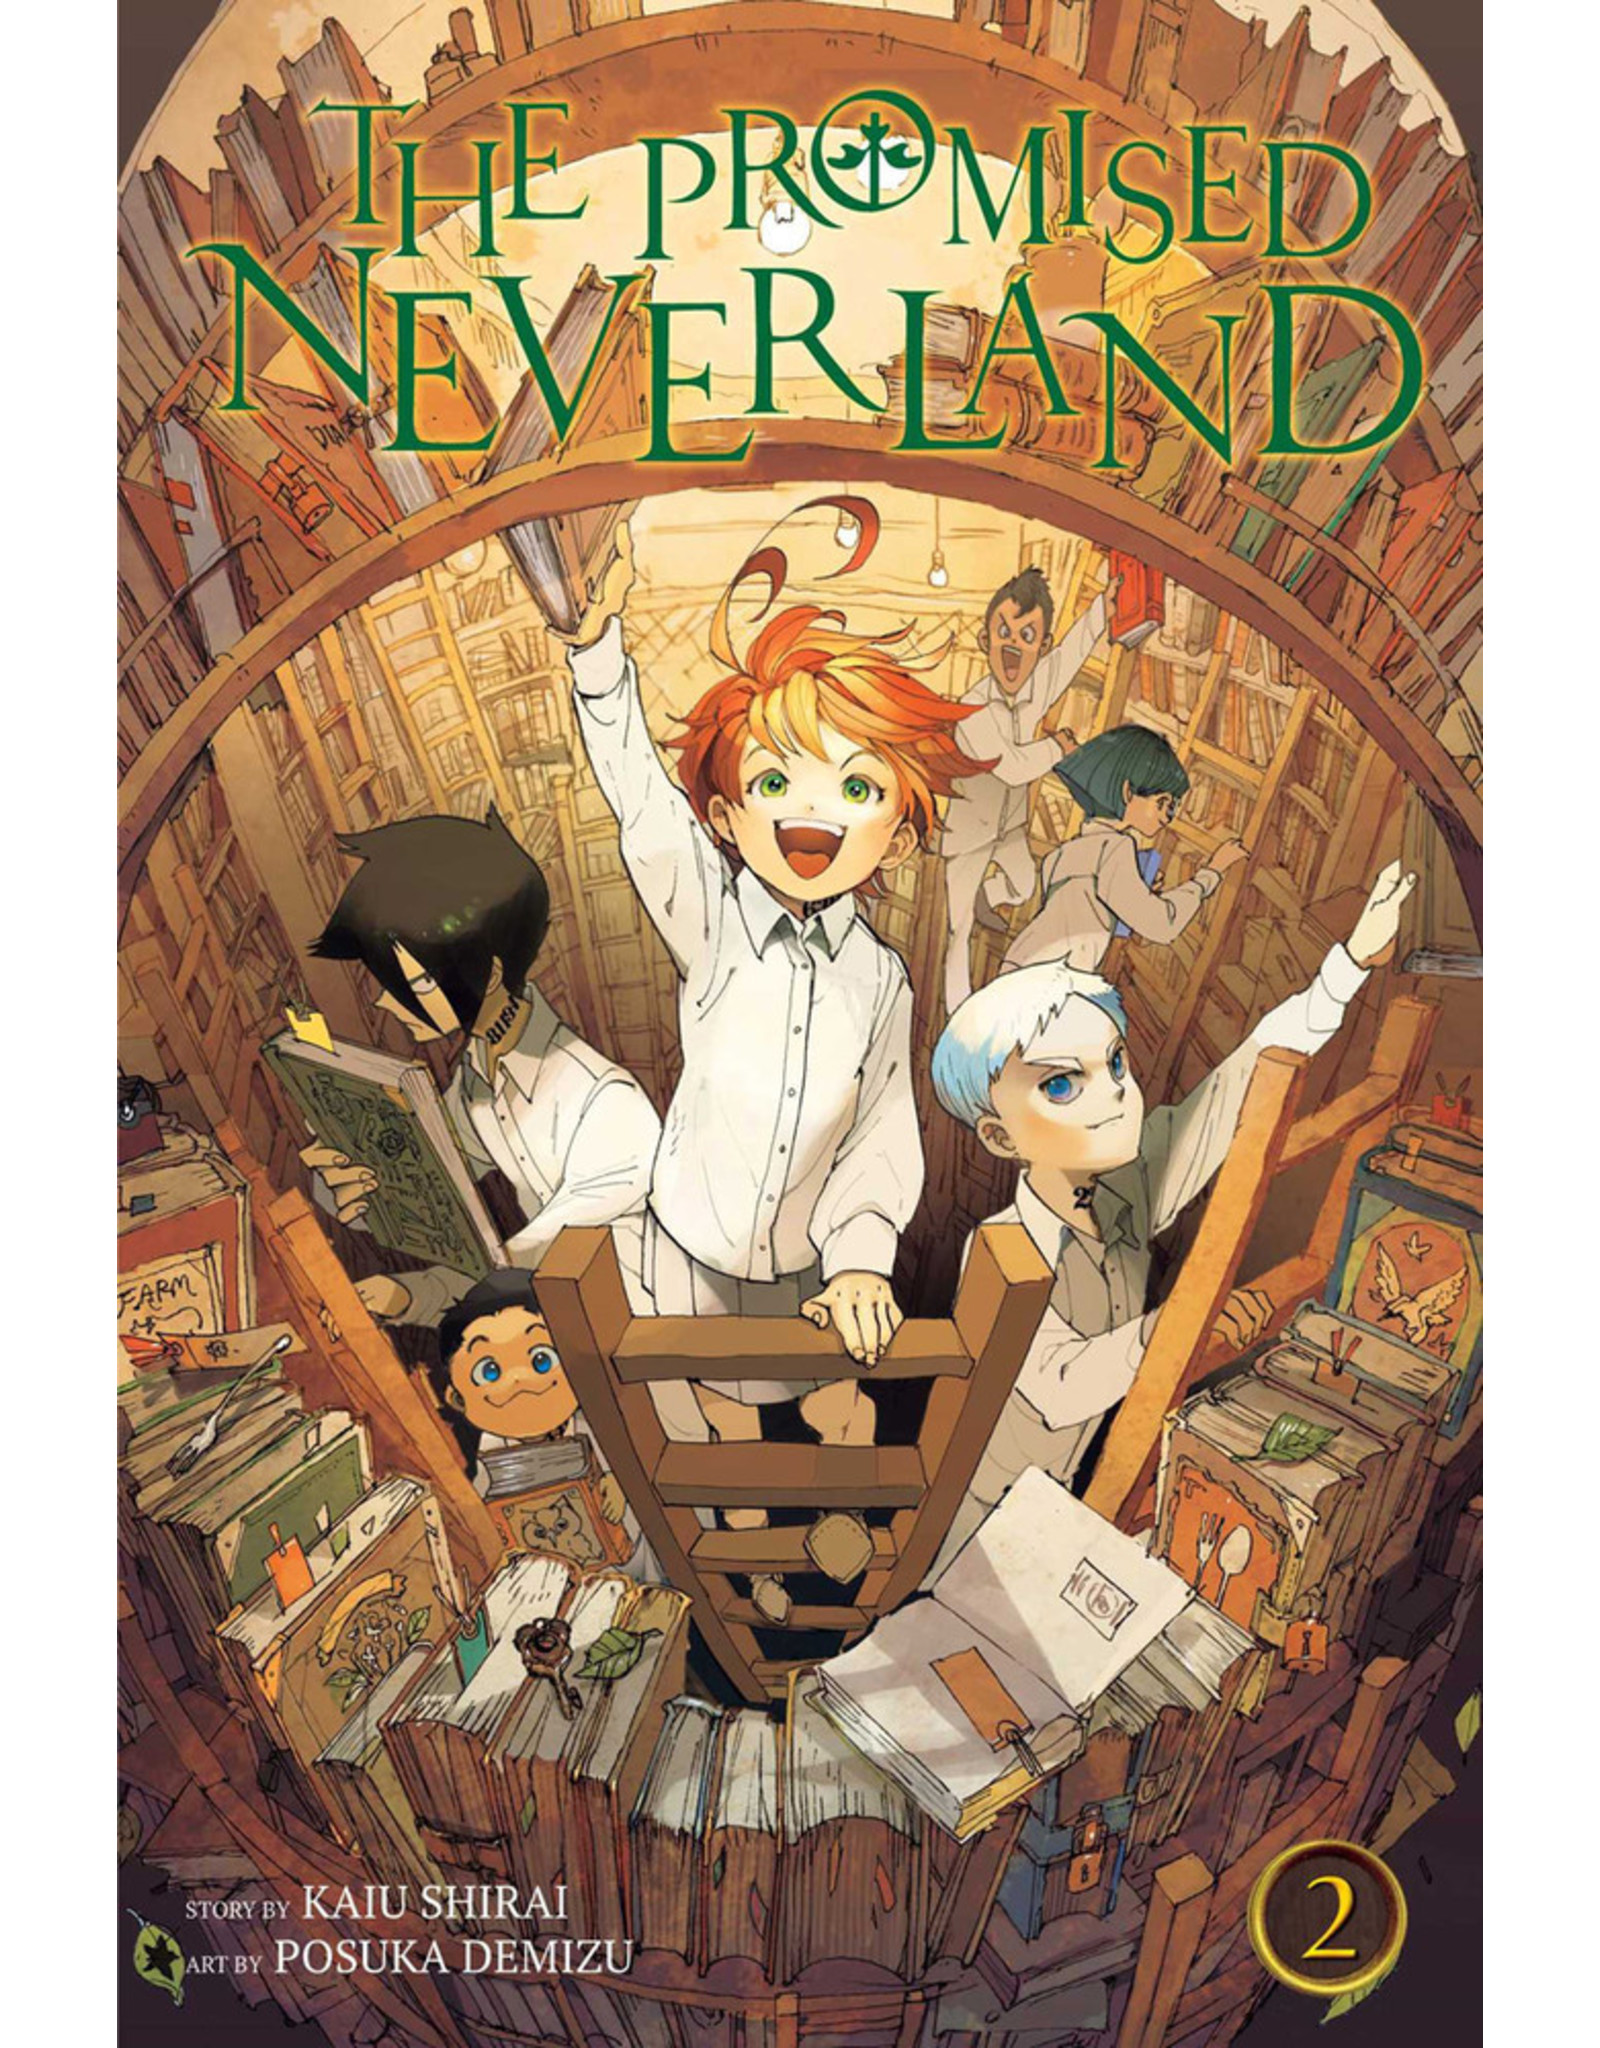 The Promised Neverland Vol. 2